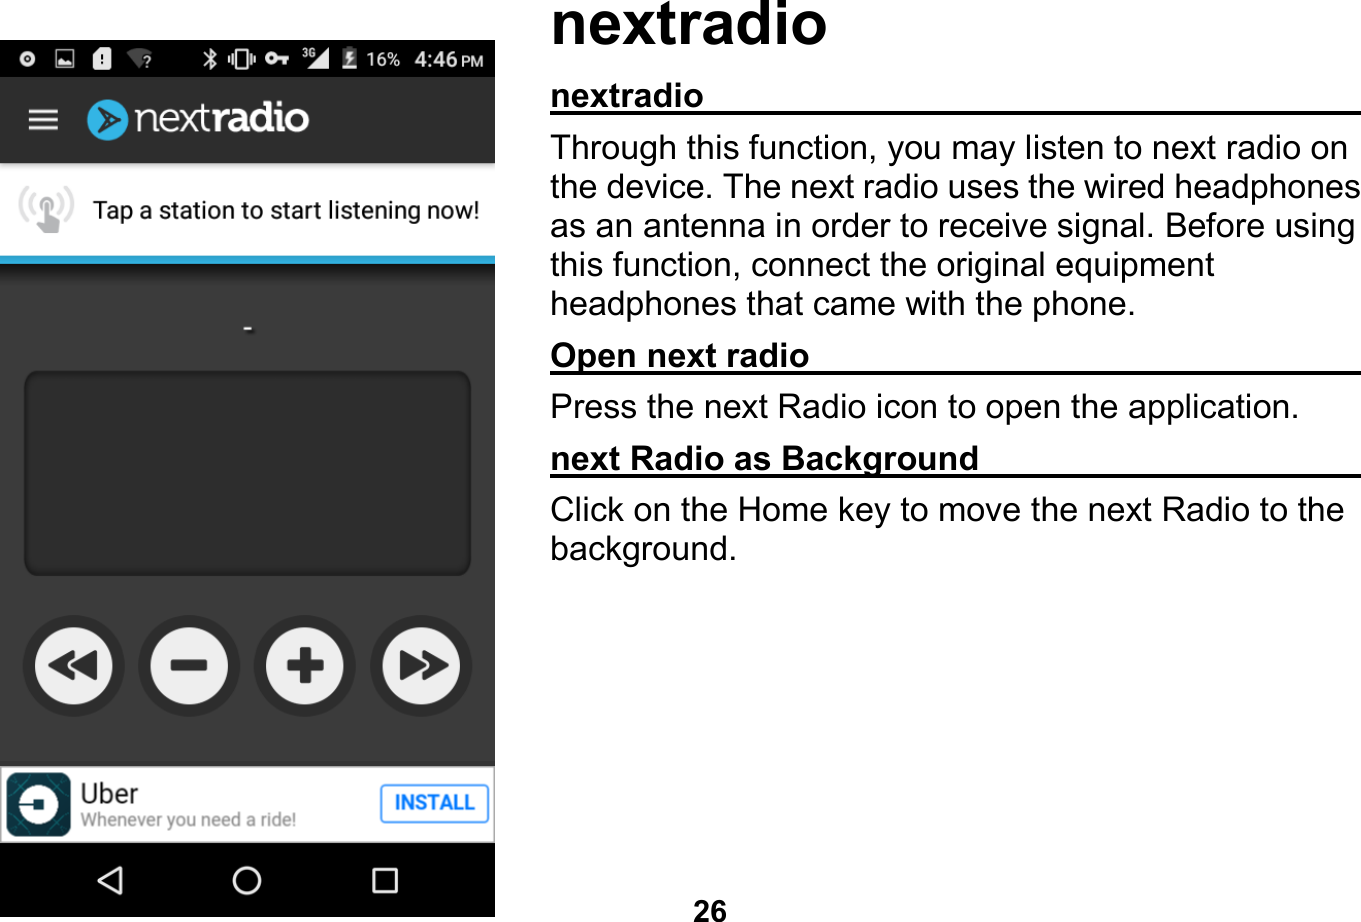   26  nextradio nextradio                                                    Through this function, you may listen to next radio on the device. The next radio uses the wired headphones as an antenna in order to receive signal. Before using this function, connect the original equipment headphones that came with the phone. Open next radio                                              Press the next Radio icon to open the application. next Radio as Background                               Click on the Home key to move the next Radio to the background.   